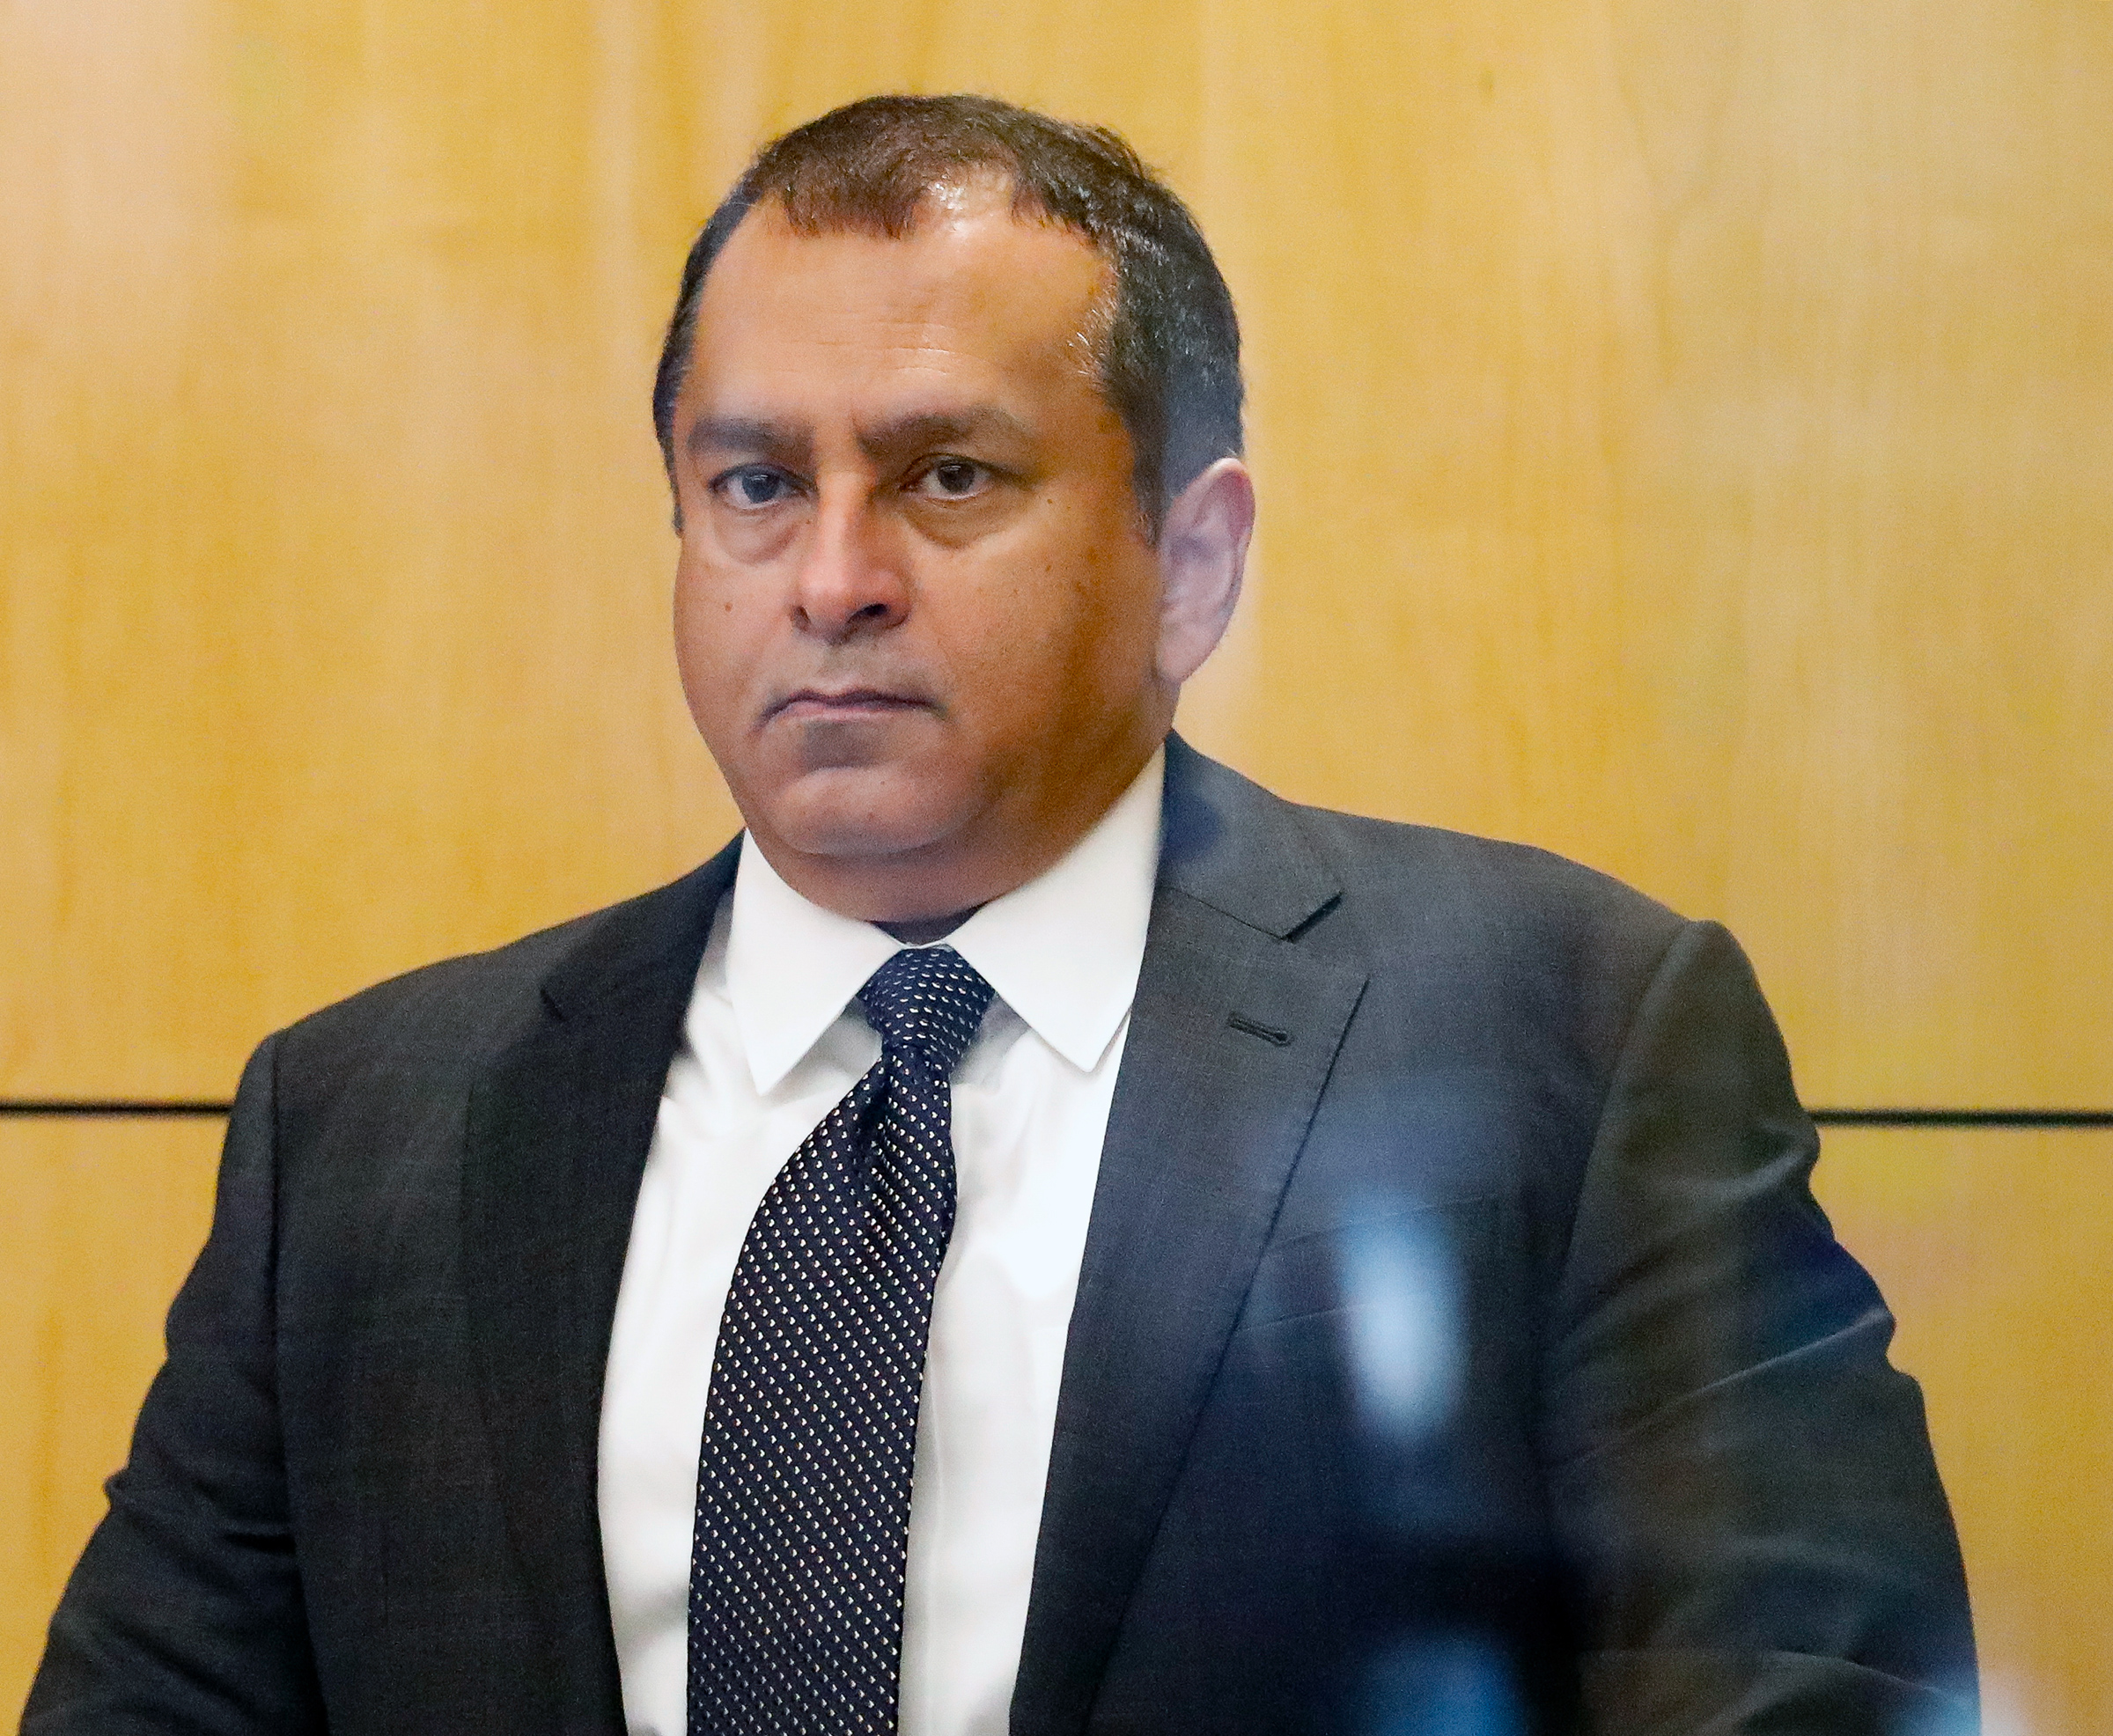 Former Theranos COO Ramesh Balwani appears in federal court for a status hearing on July 17, 2019 in San Jose, California. (Kimberly White—Getty Images)